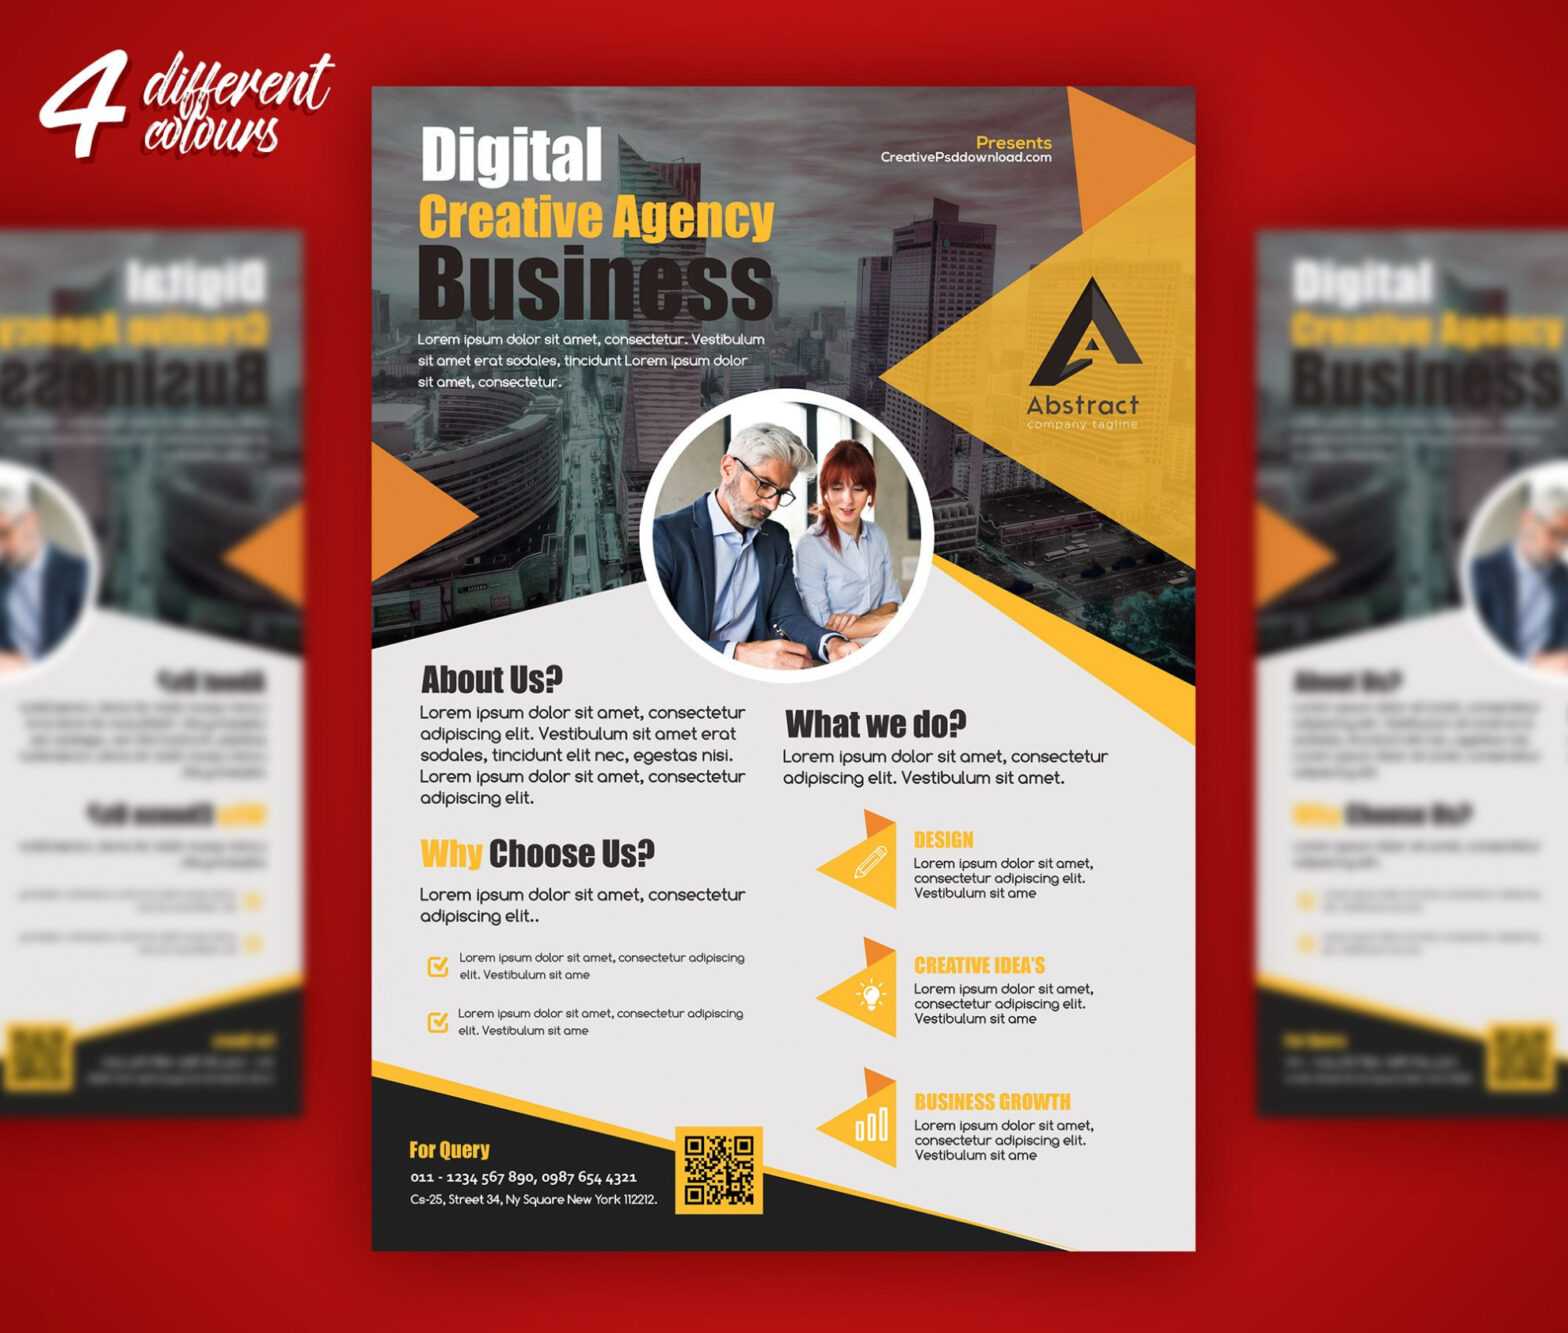 Professional Business Flyer Psd Freebie intended for Flyer Design Templates Psd Free Download